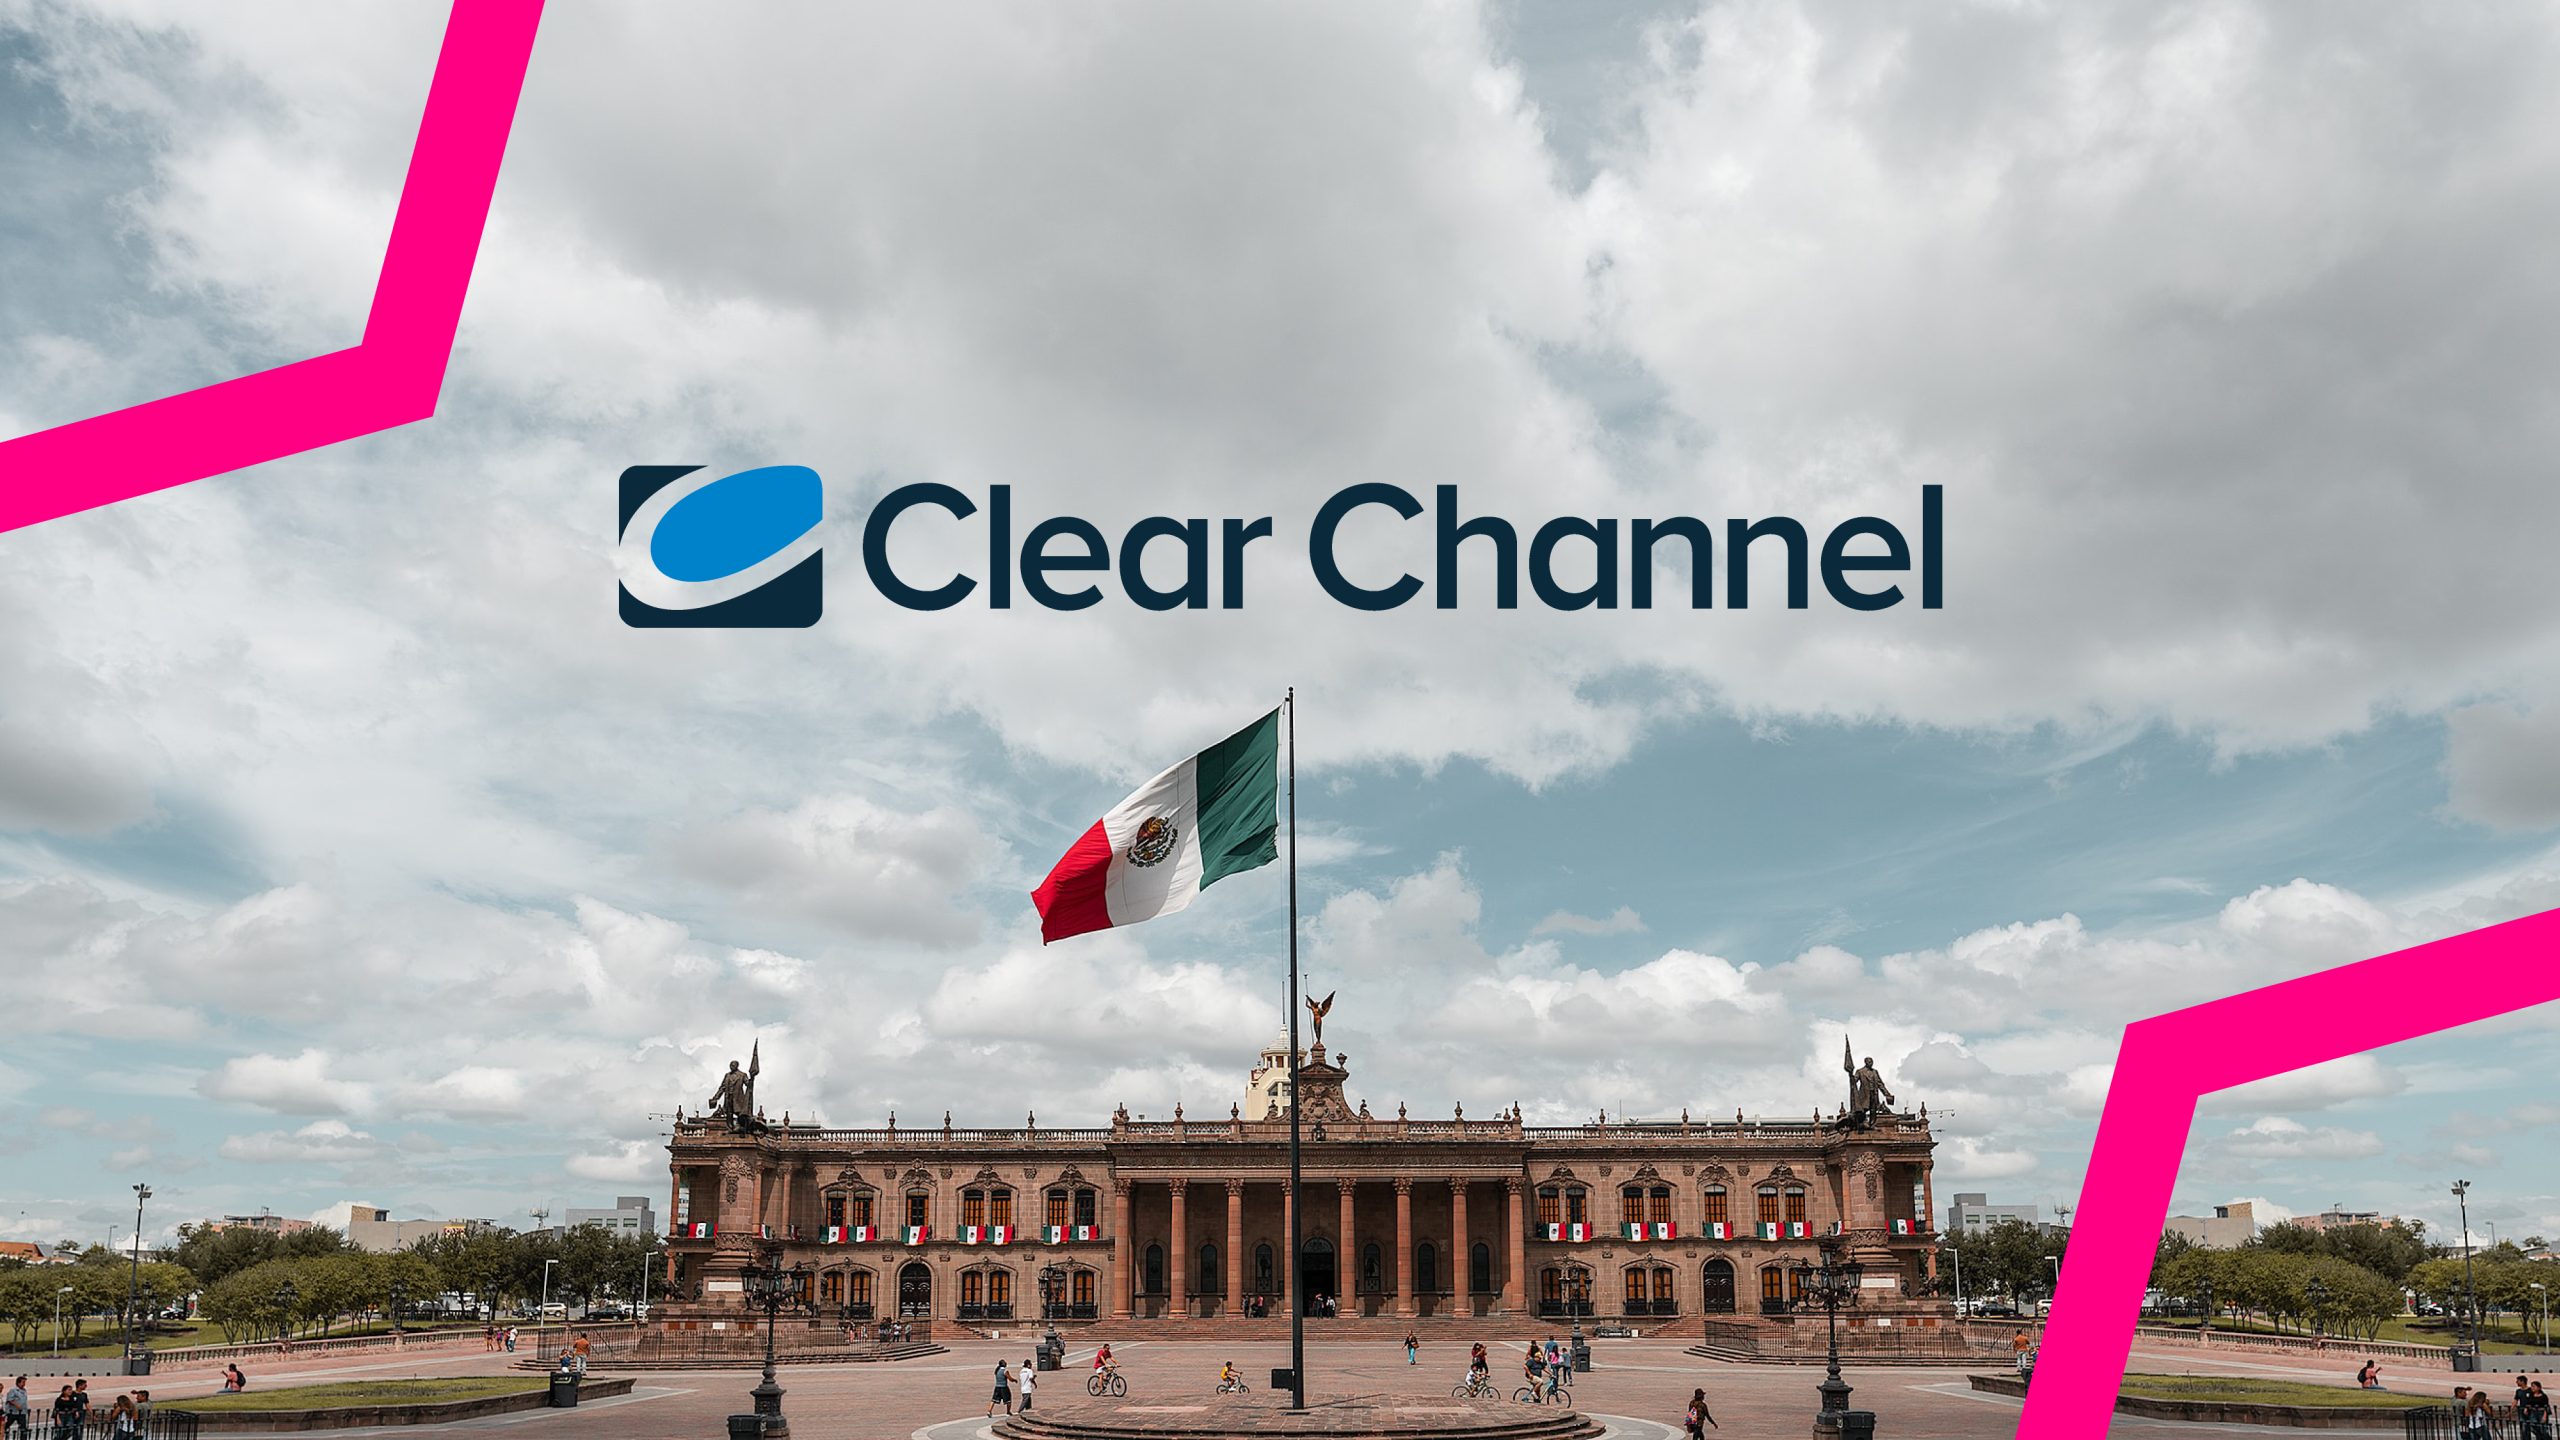 Partnership to offer unprecedented scale to programmatic advertisers across Mexico, Chile and Peru